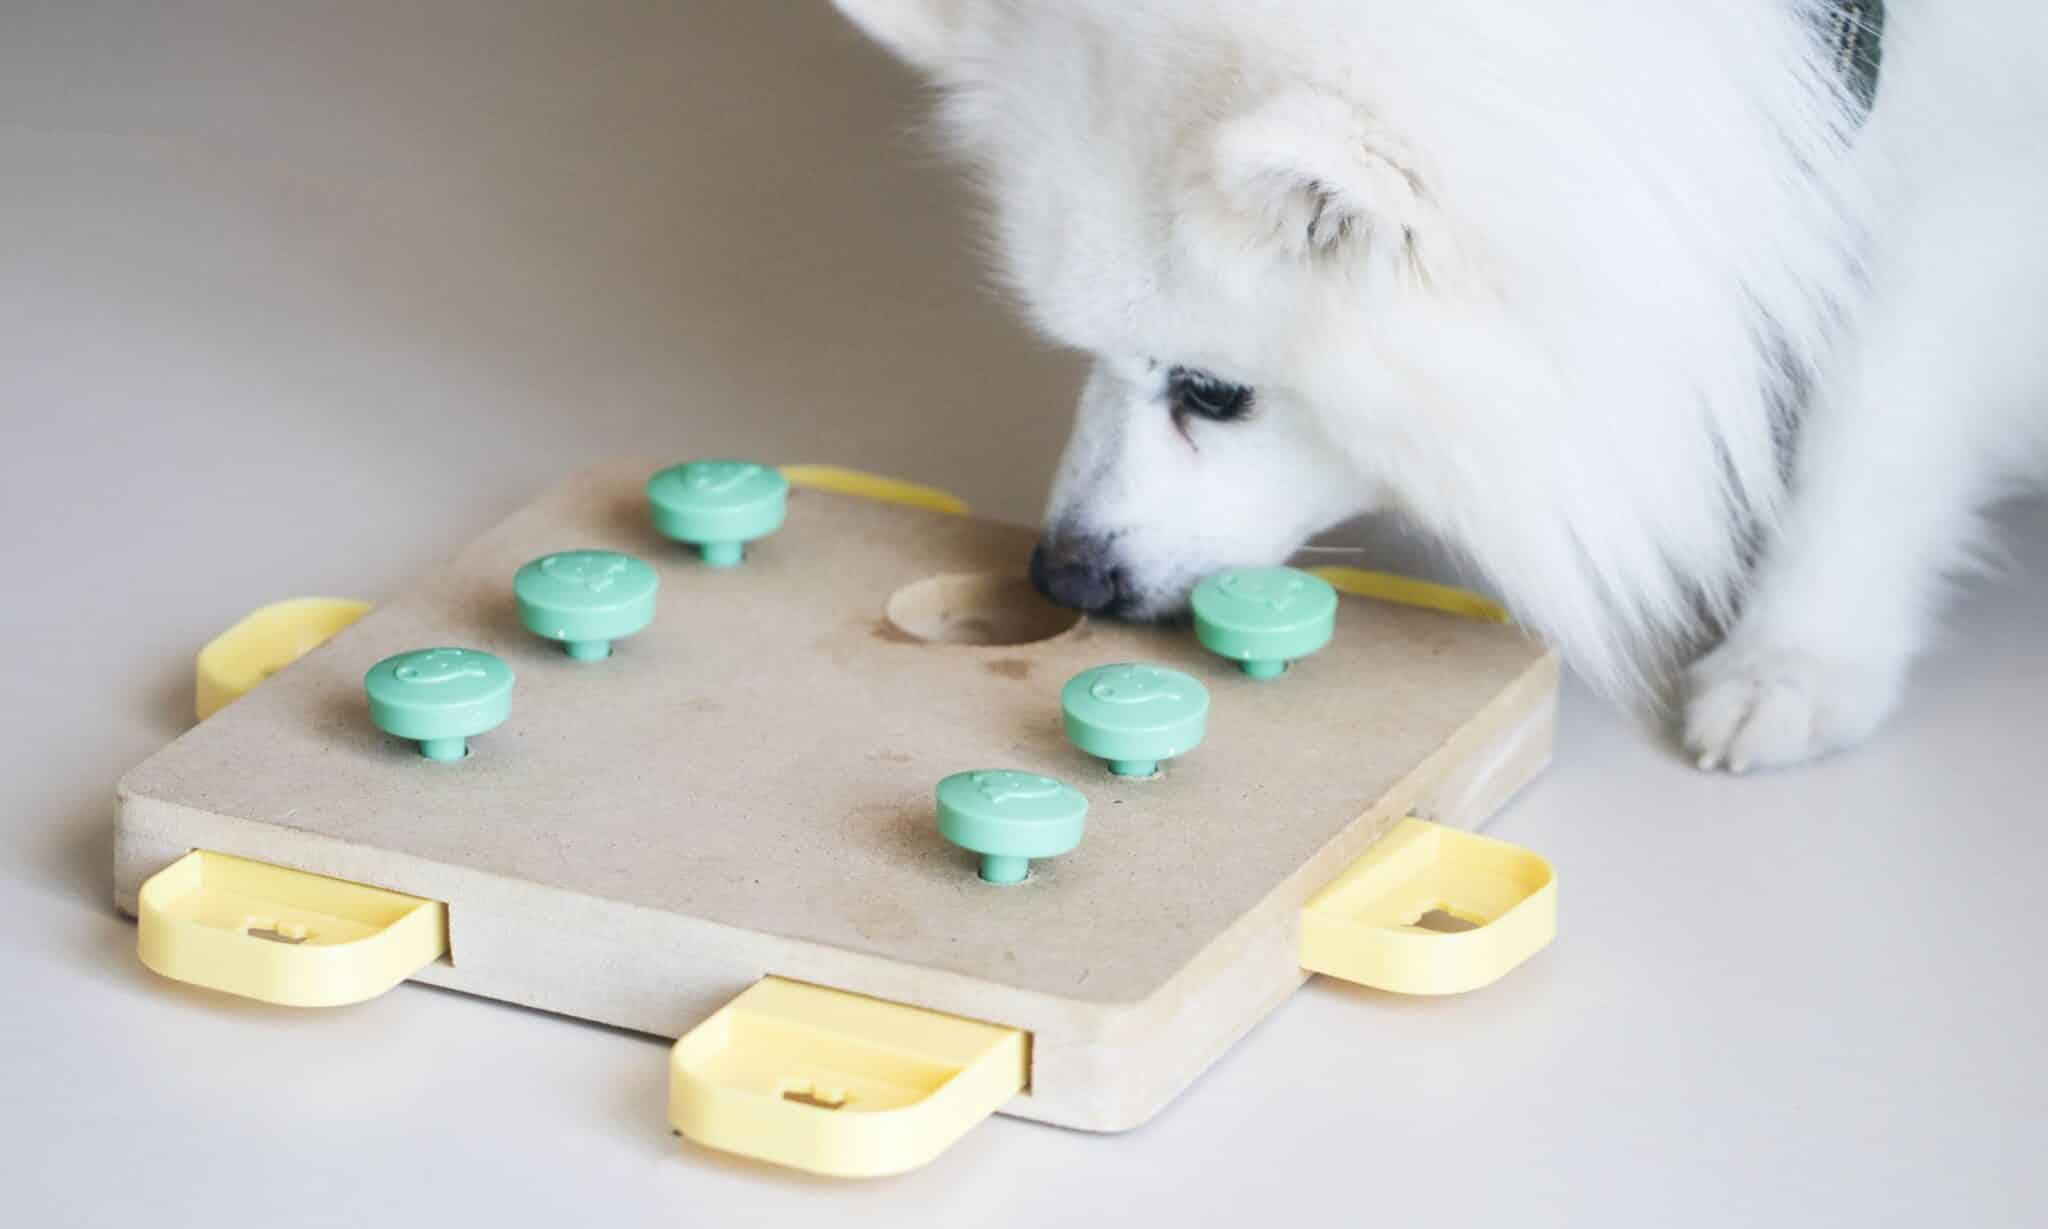 Three Simple Nose Work Games to Play With Your Dog